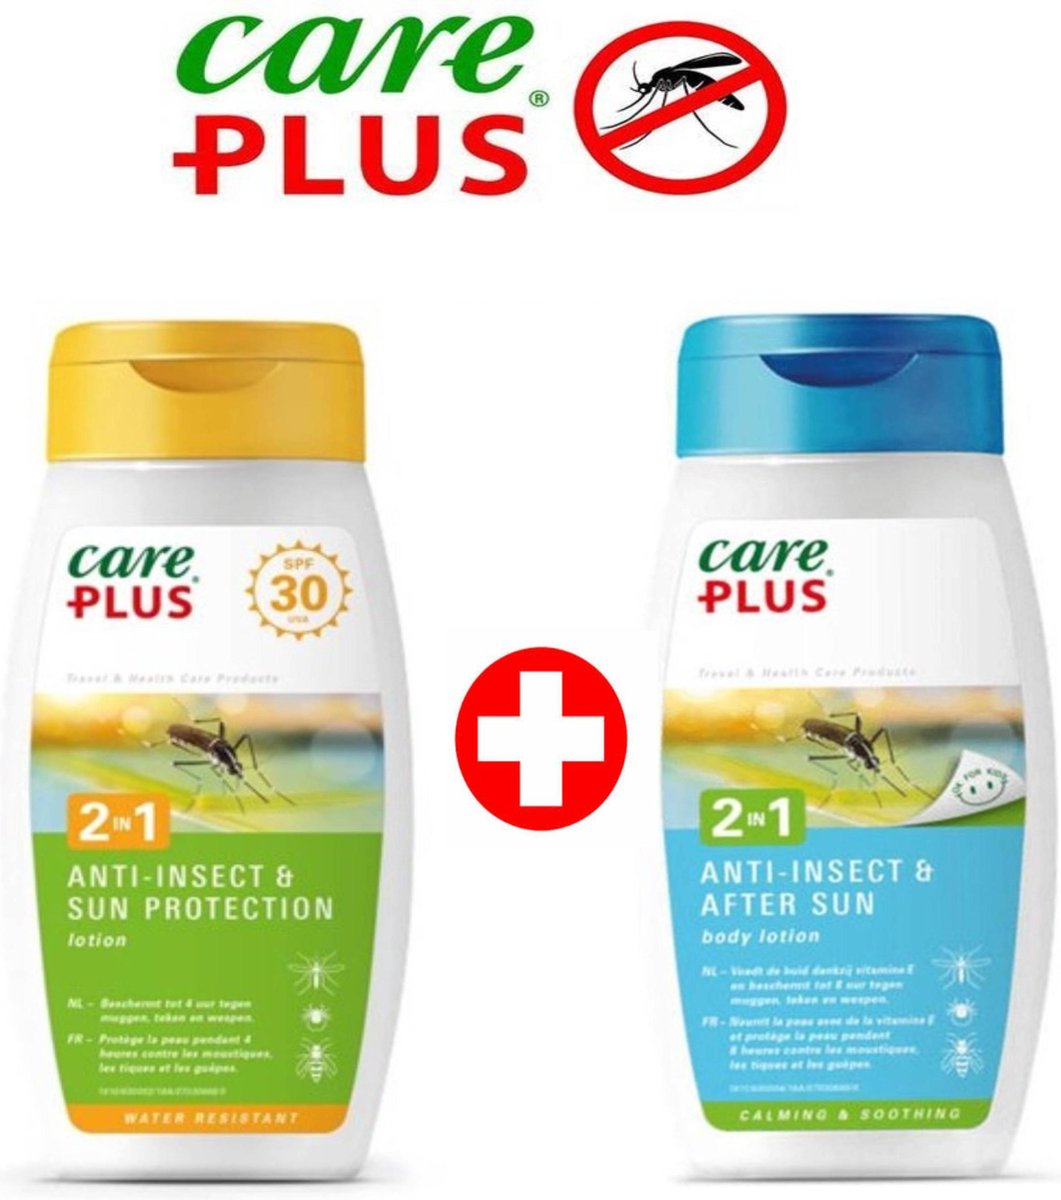 Schuldig Magazijn Bedenken Care Plus 2 in 1 Anti-Insect & Sun Protection / 2in1 Anti-Insect & After  Sun body lotion | bol.com